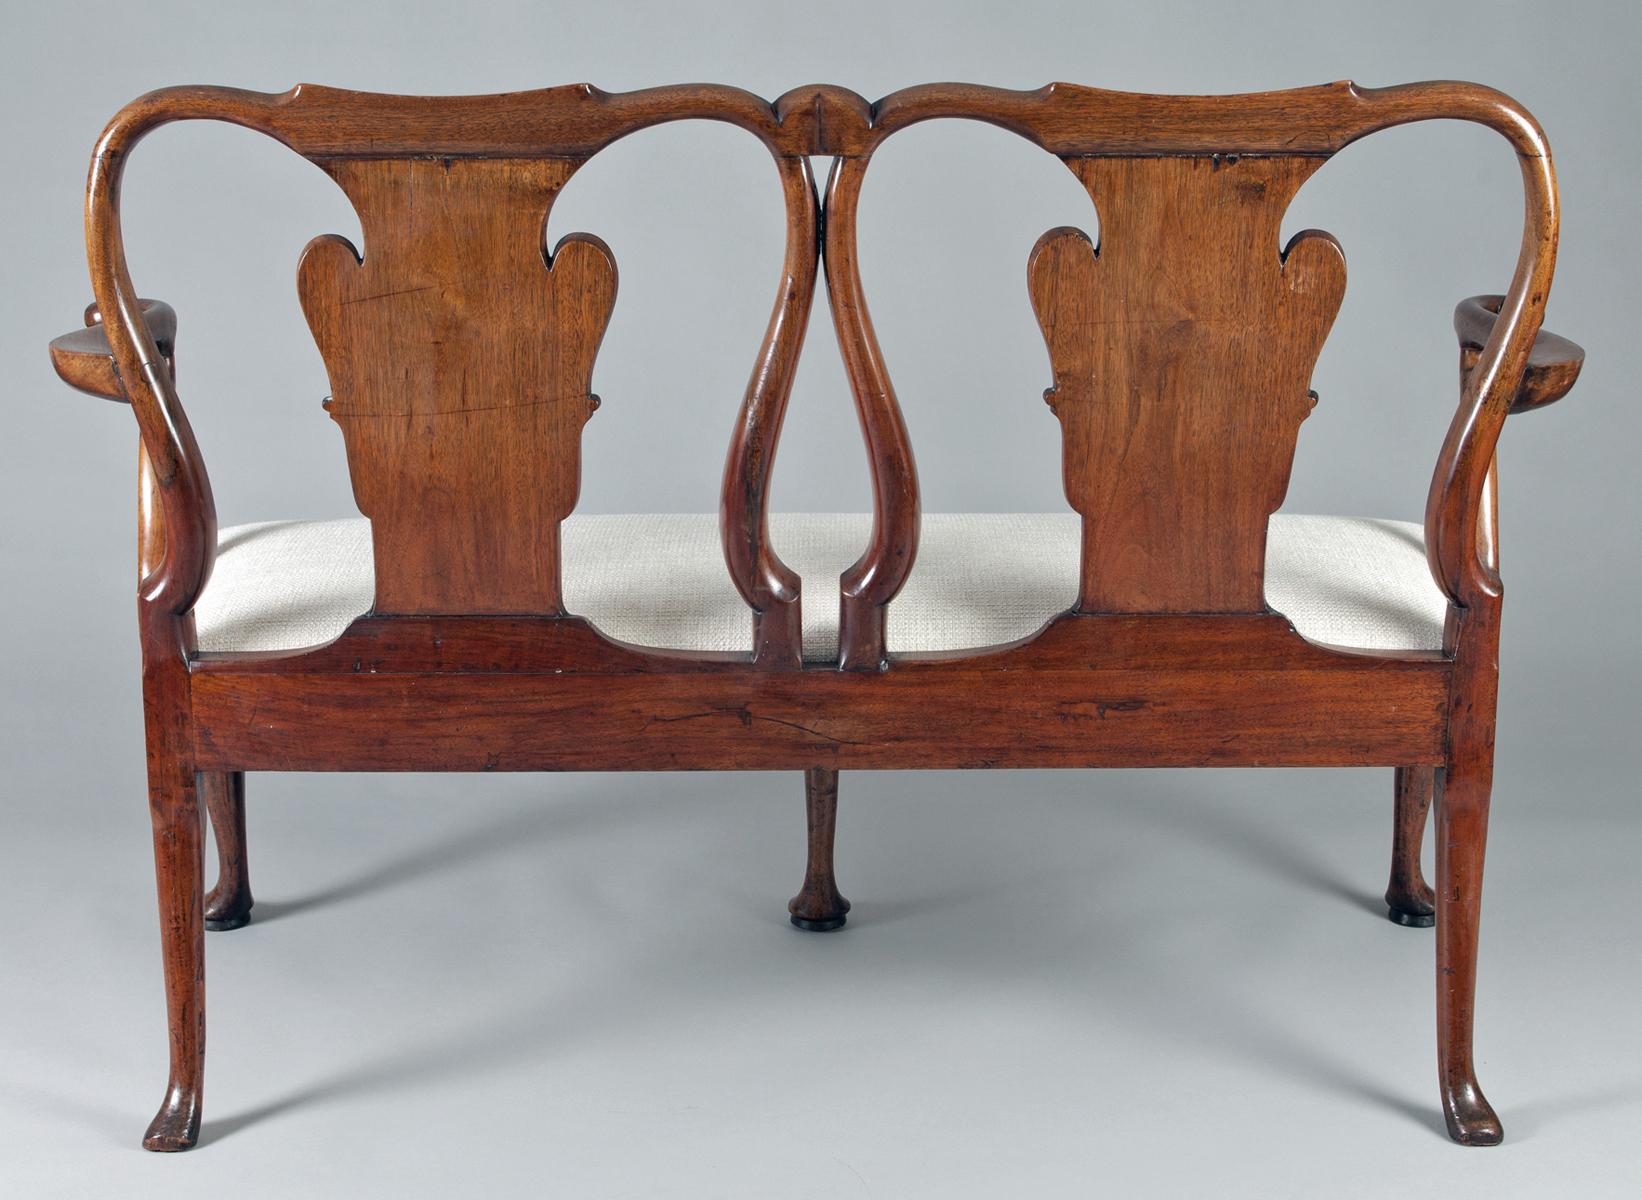 Mid-18th Century George I Walnut Double Chair-Back Settee For Sale